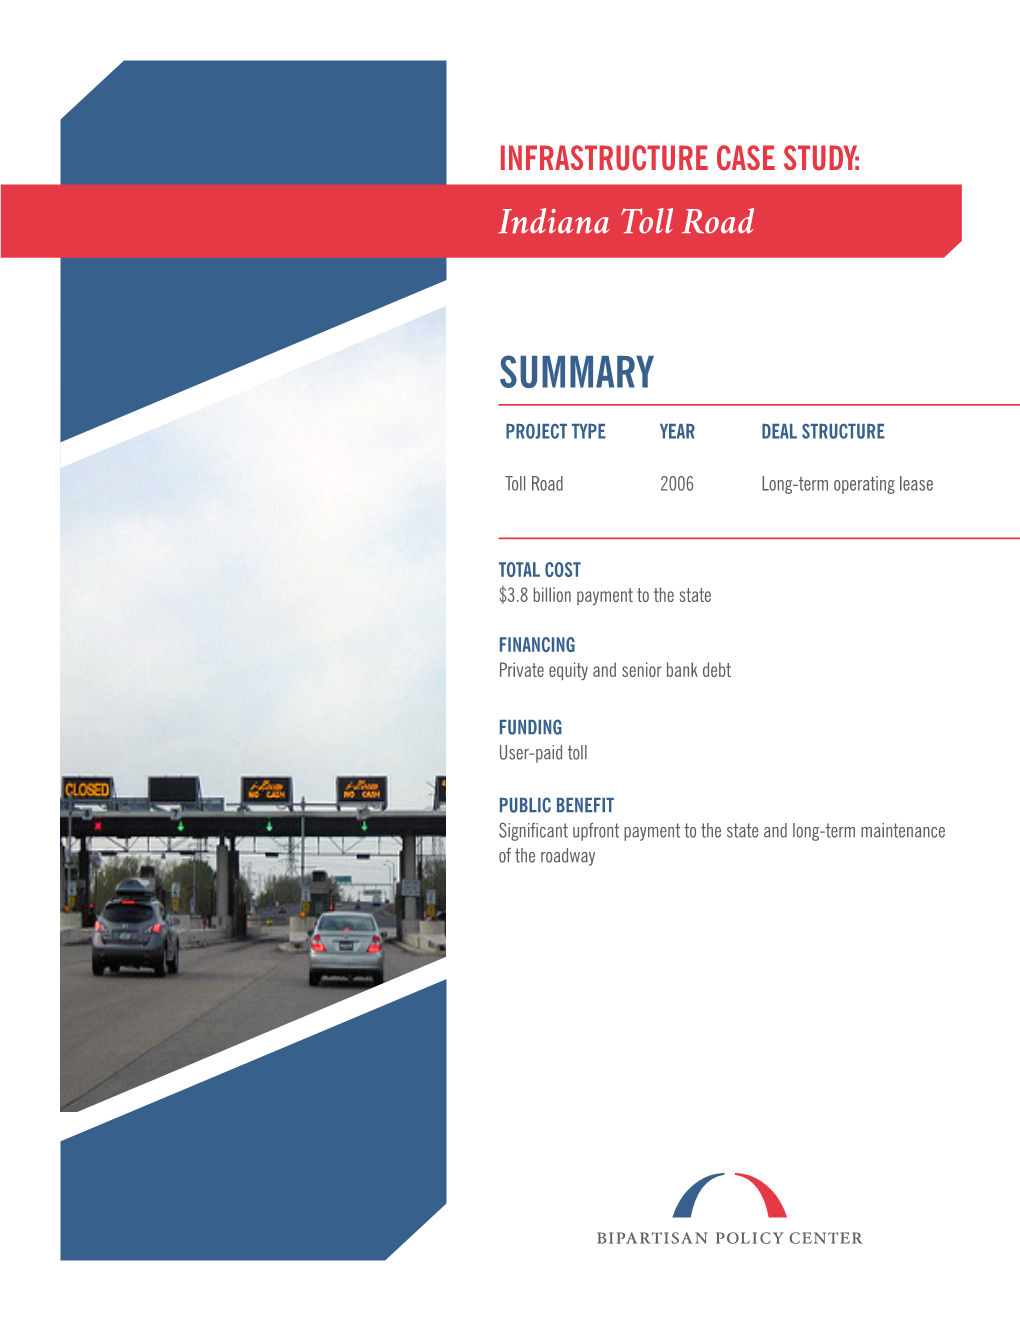 Indiana Toll Road